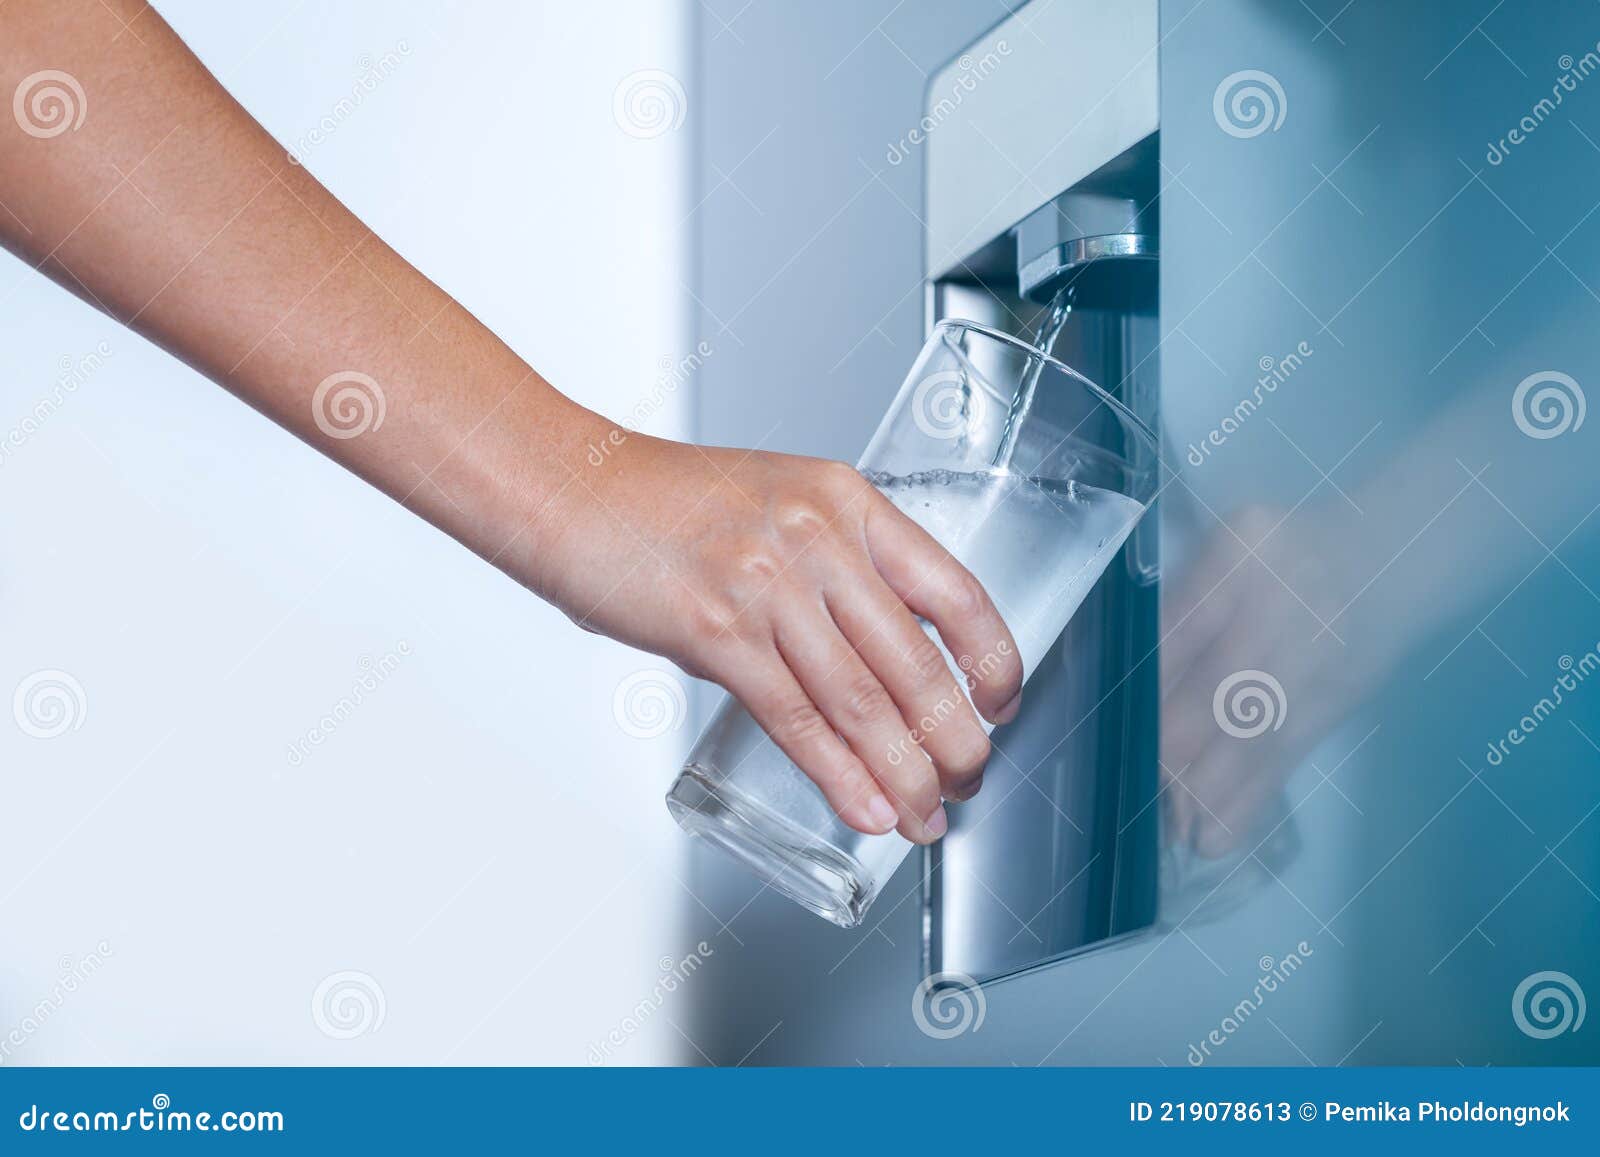 water dispenser from dispenser of home fridge, woman is filling a glass with water from the refrigerator